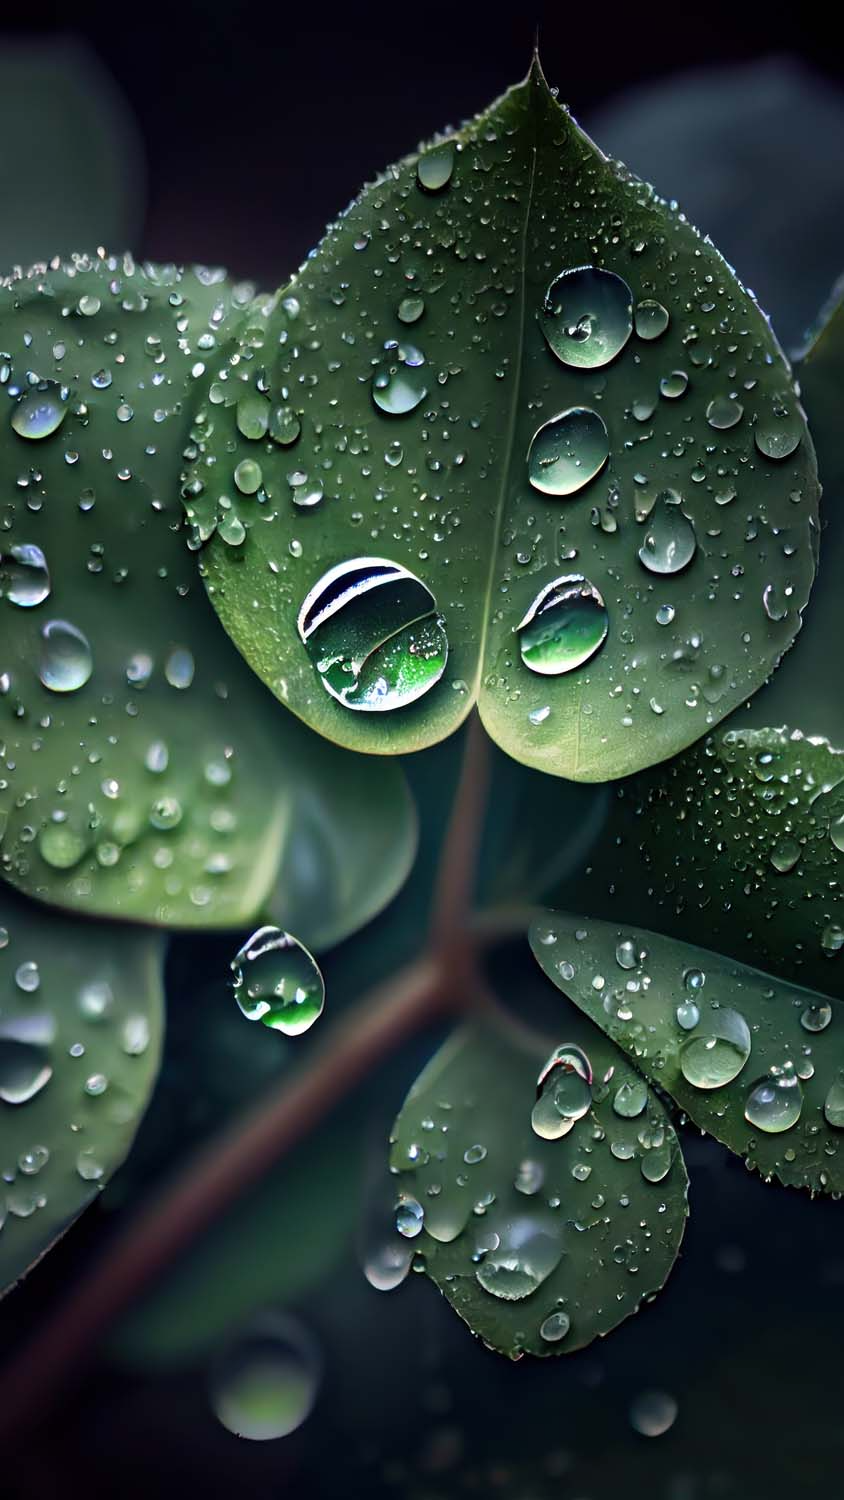 Water Drops On Leaves IPhone Wallpaper HD  IPhone Wallpapers